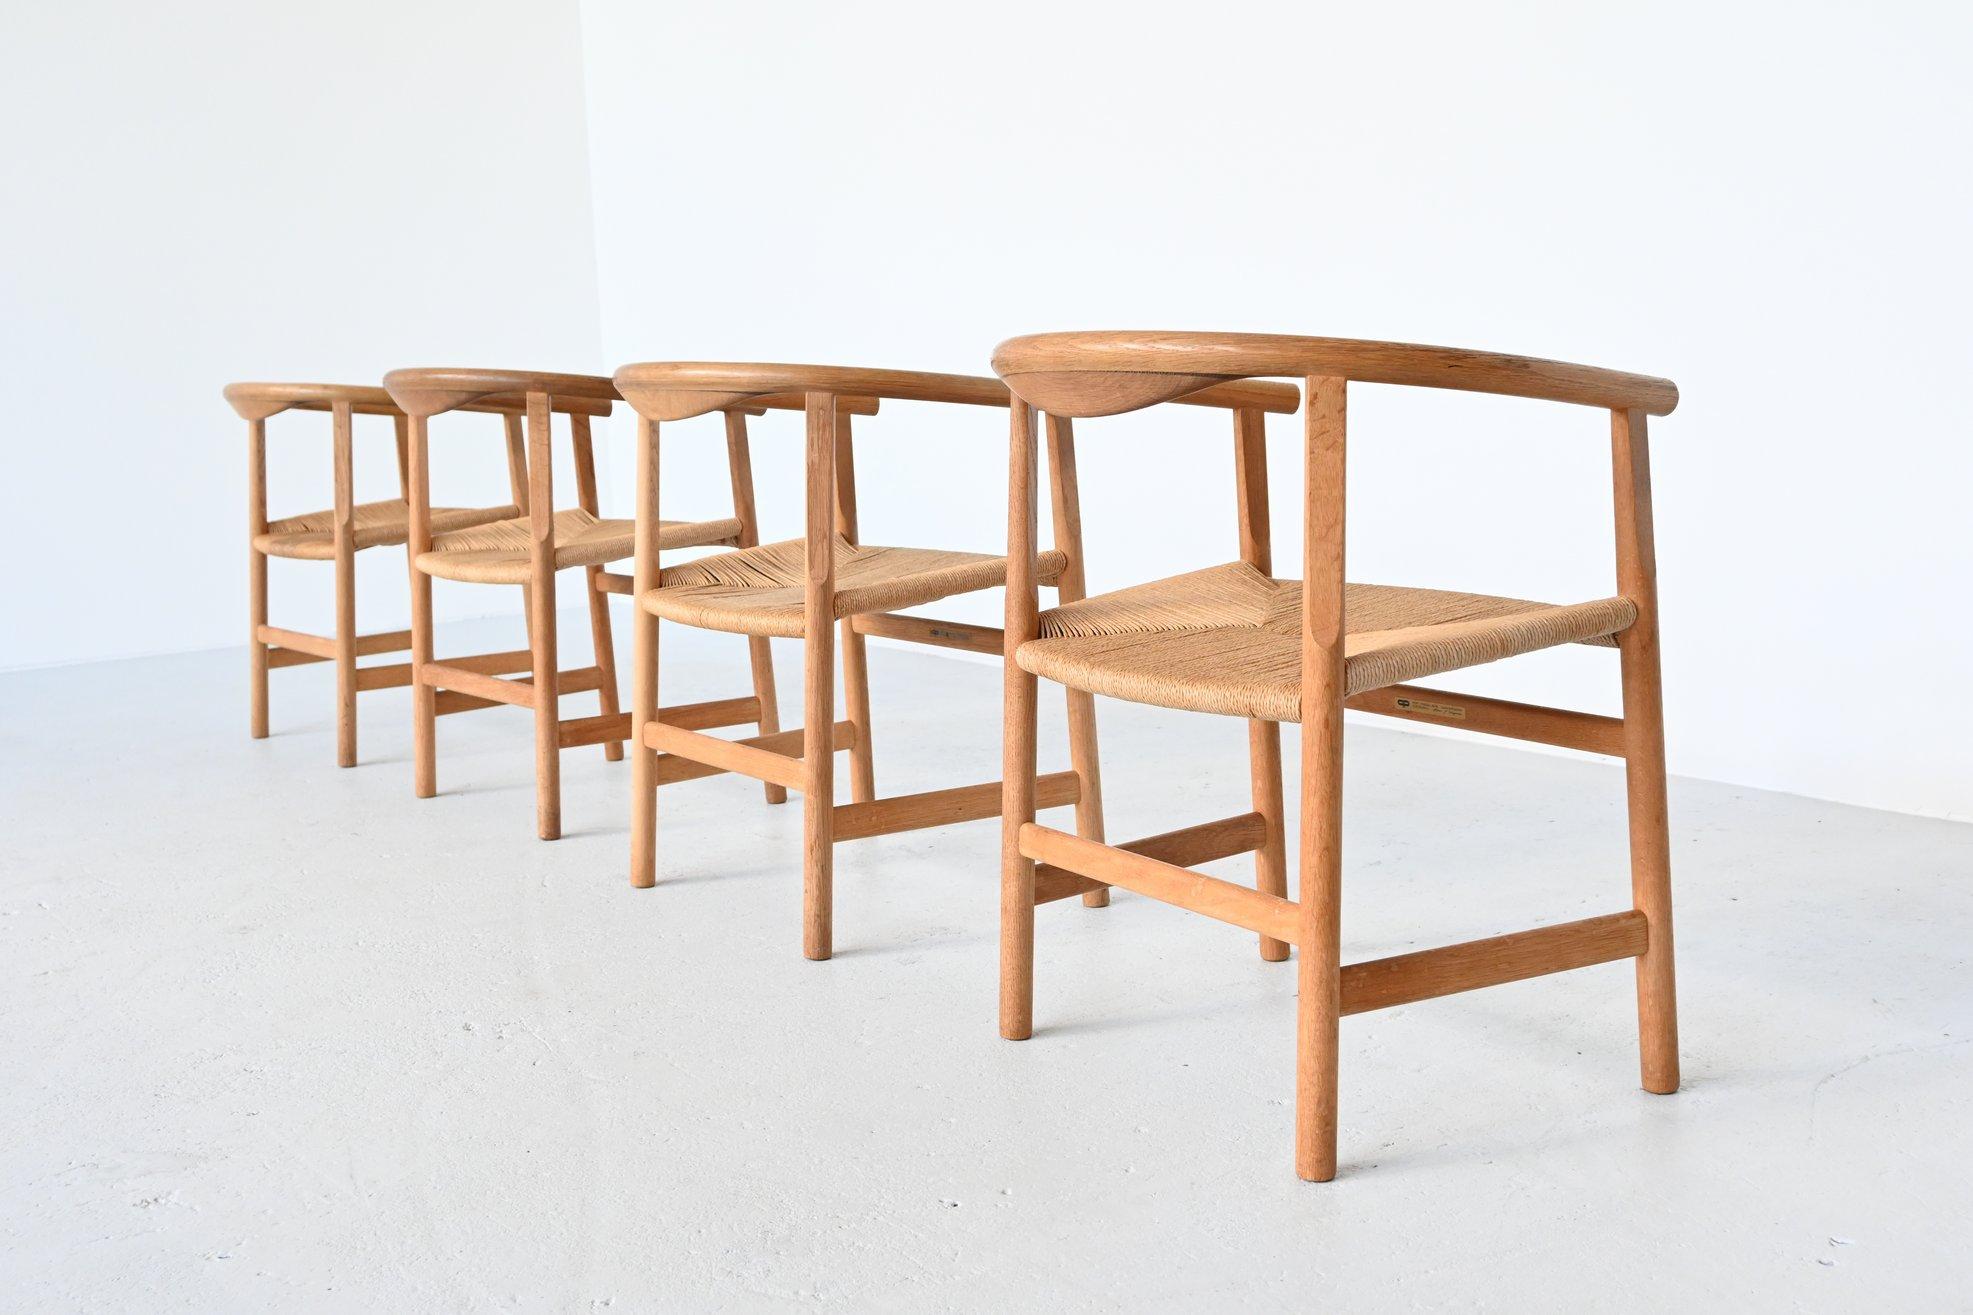 Fantastic rare set of 4 dining chairs designed by Hans J. Wegner and manufactured by PP Møbler, Denmark 1969. This is a set of 4 early examples in very nice original condition. These chairs are made of solid oakwood and have paper cord seats. They